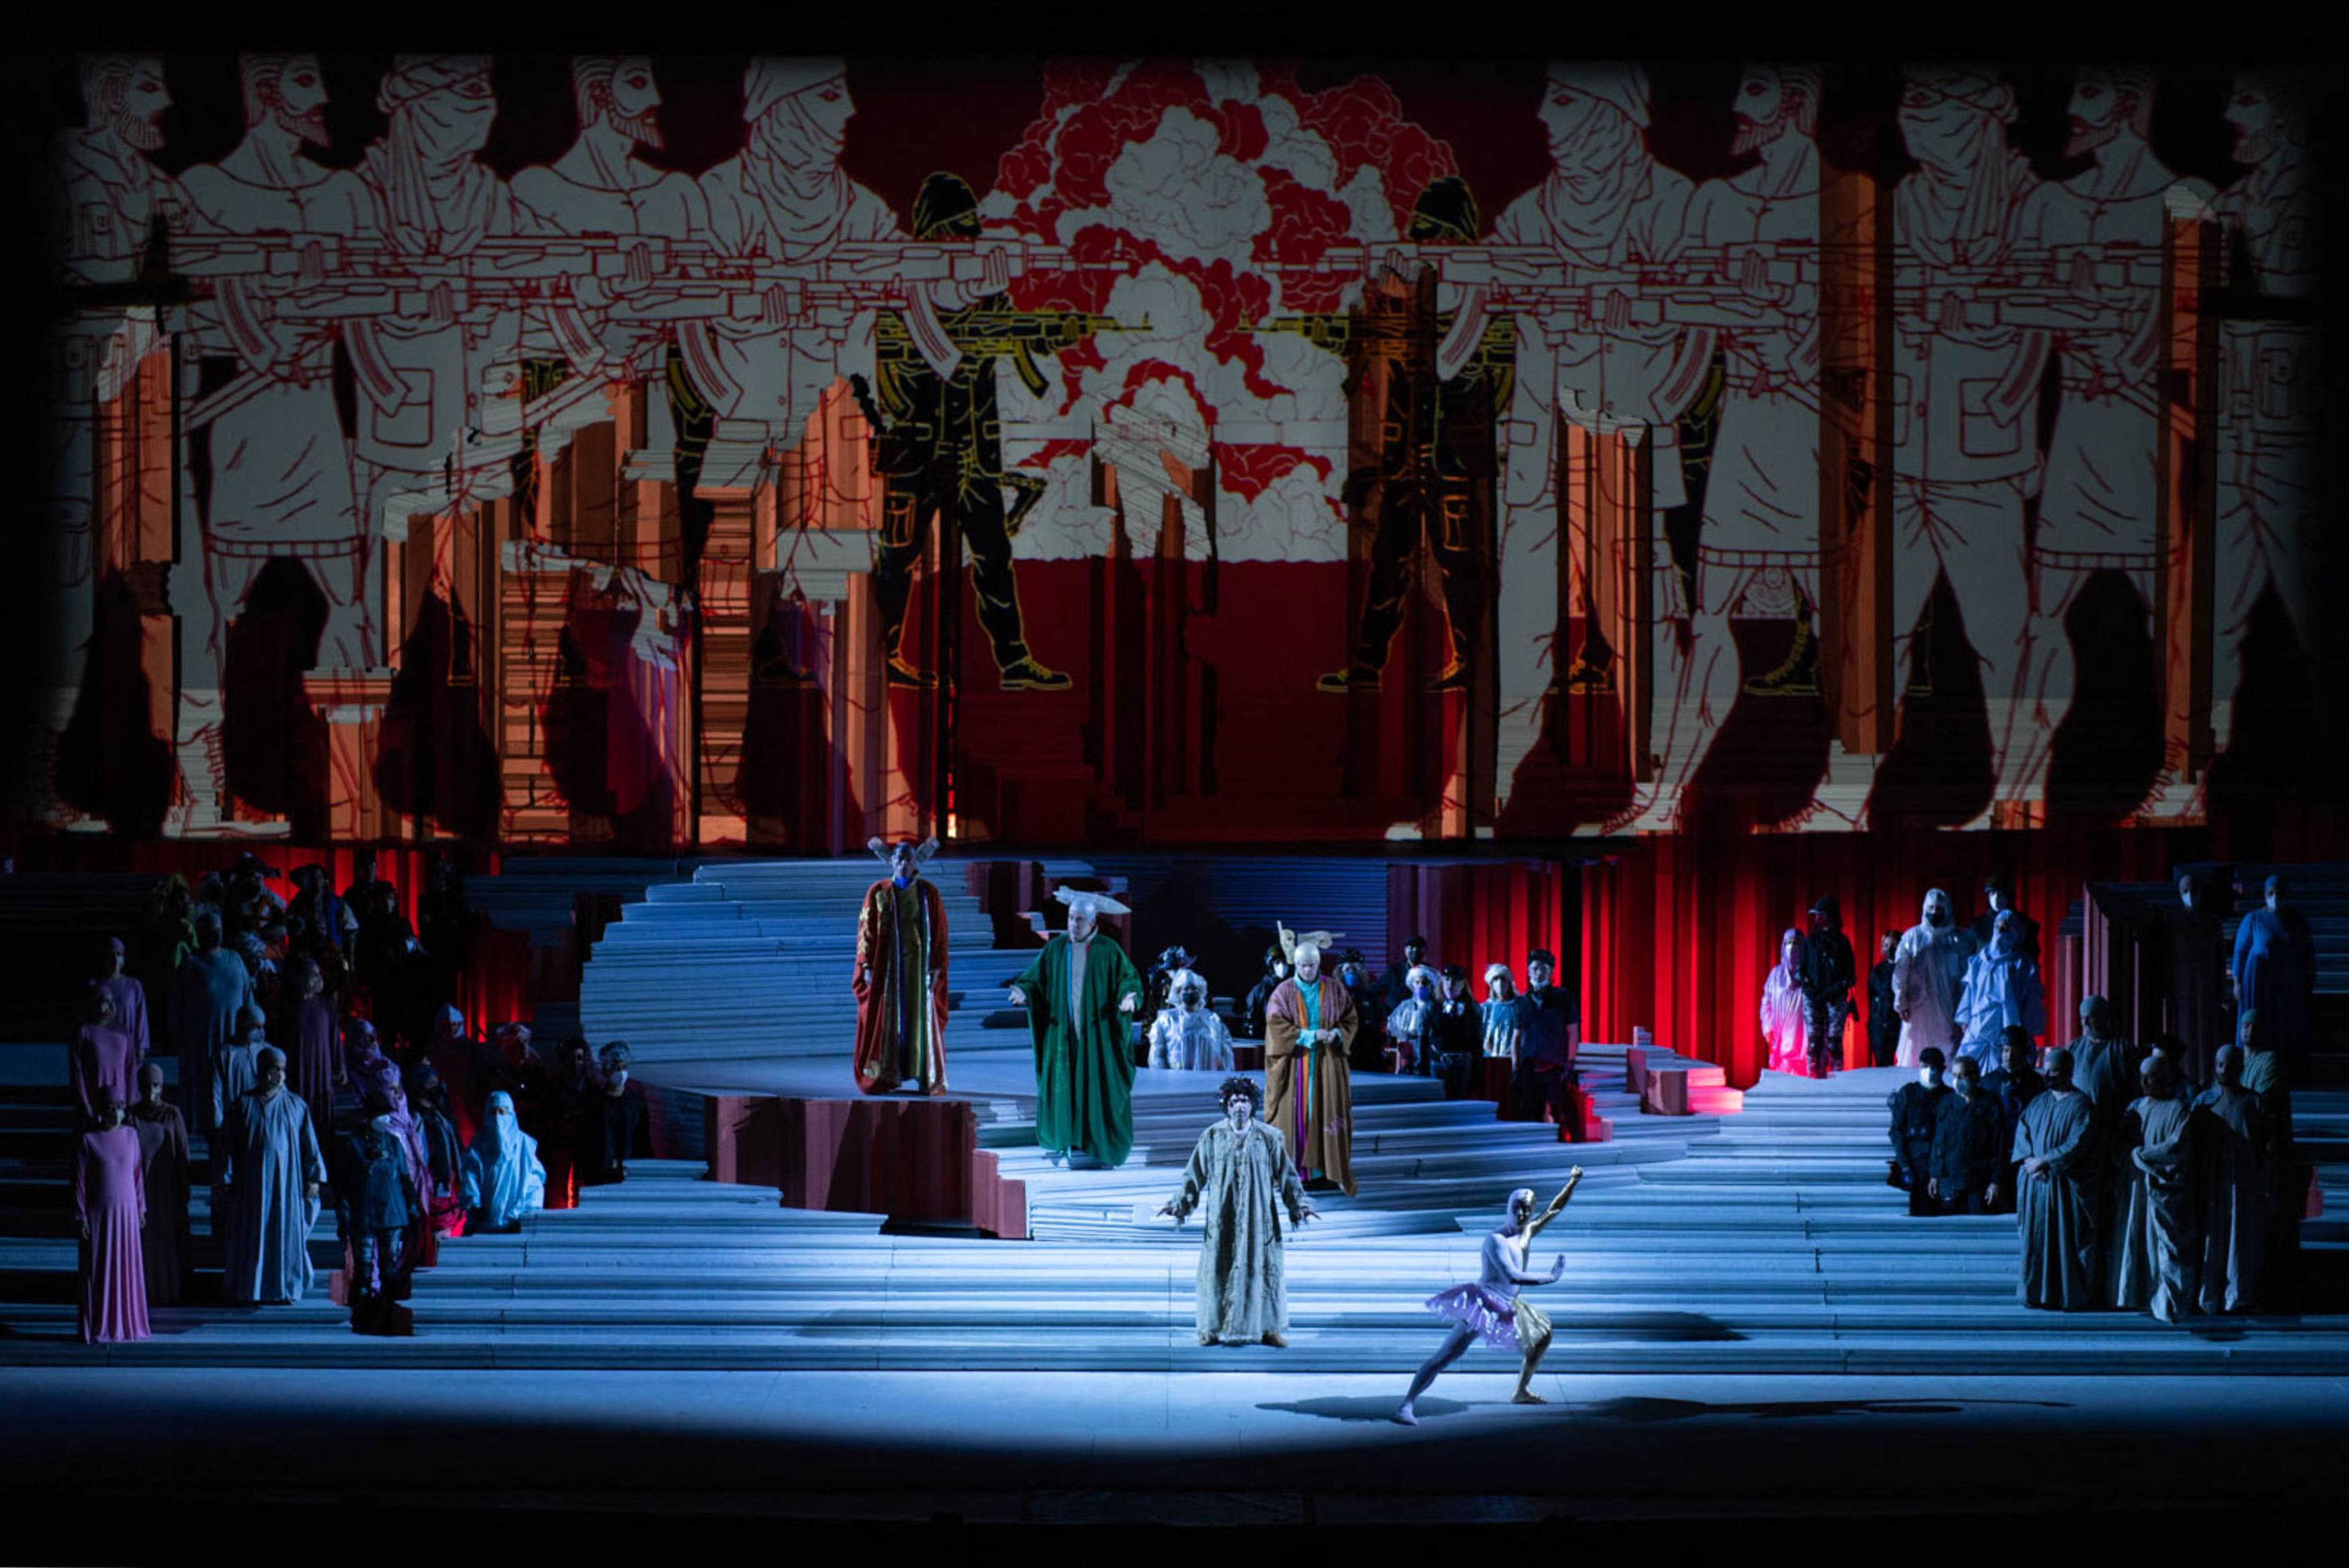 Artists perform in a production of Puccini’s opera “Turandot” staged by Chinese artist Ai Weiwei in Rome, Italy. Photo: AFP